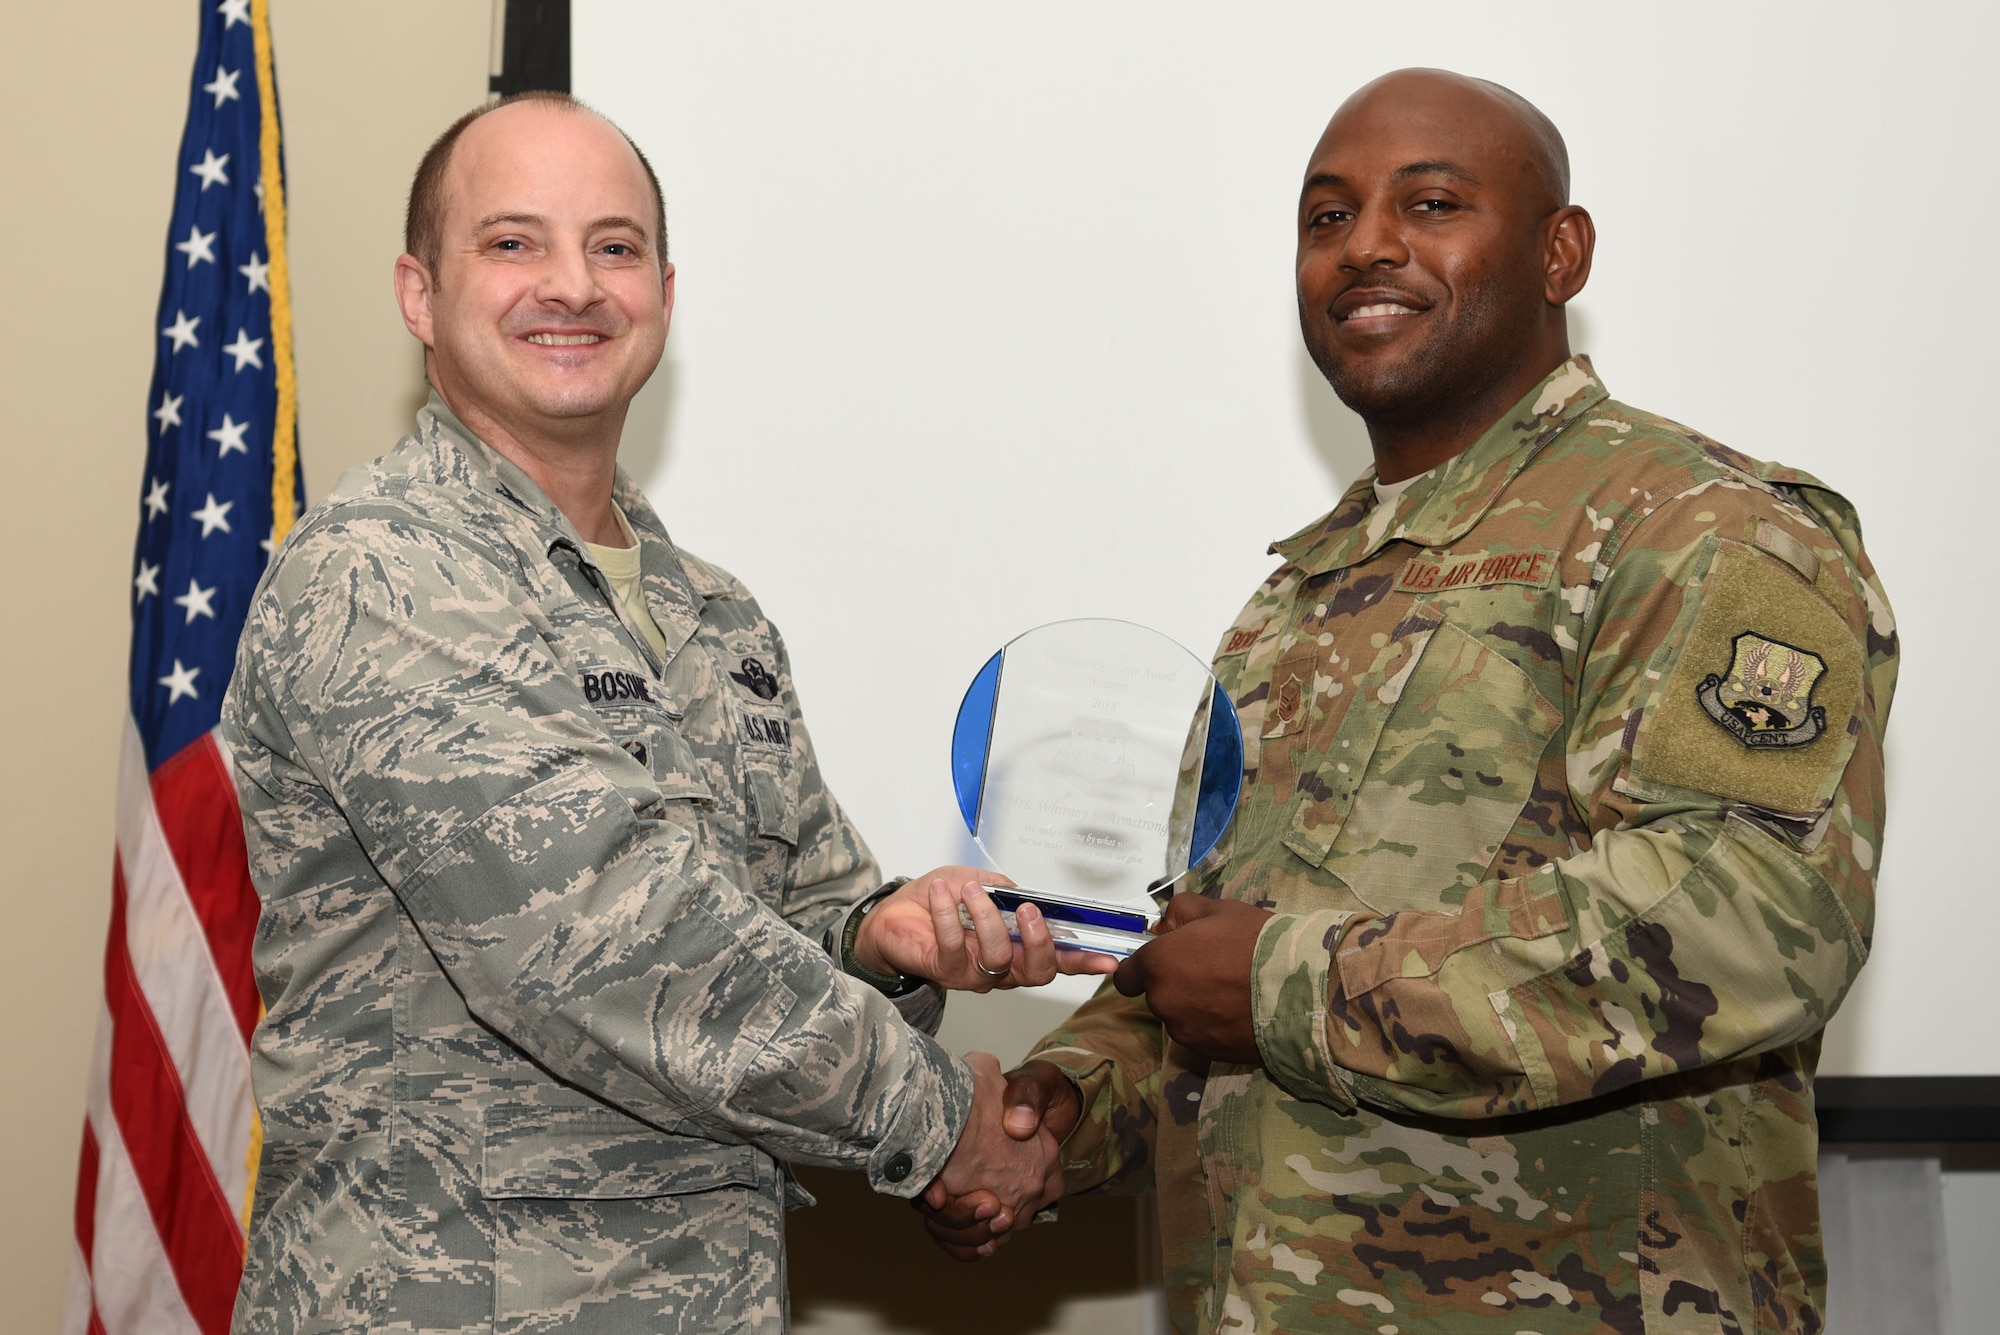 U.S. Air Force Master Sgt. Andre Booker, 51st Intelligence Squadron first sergeant, right, accepts the Volunteer Excellence Award from Col. John Bosone, 20th Fighter Wing vice commander, on behalf of Whitney Armstrong, key spouse, during an annual volunteer recognition ceremony at Shaw Air Force Base, S.C., April 19, 2018.